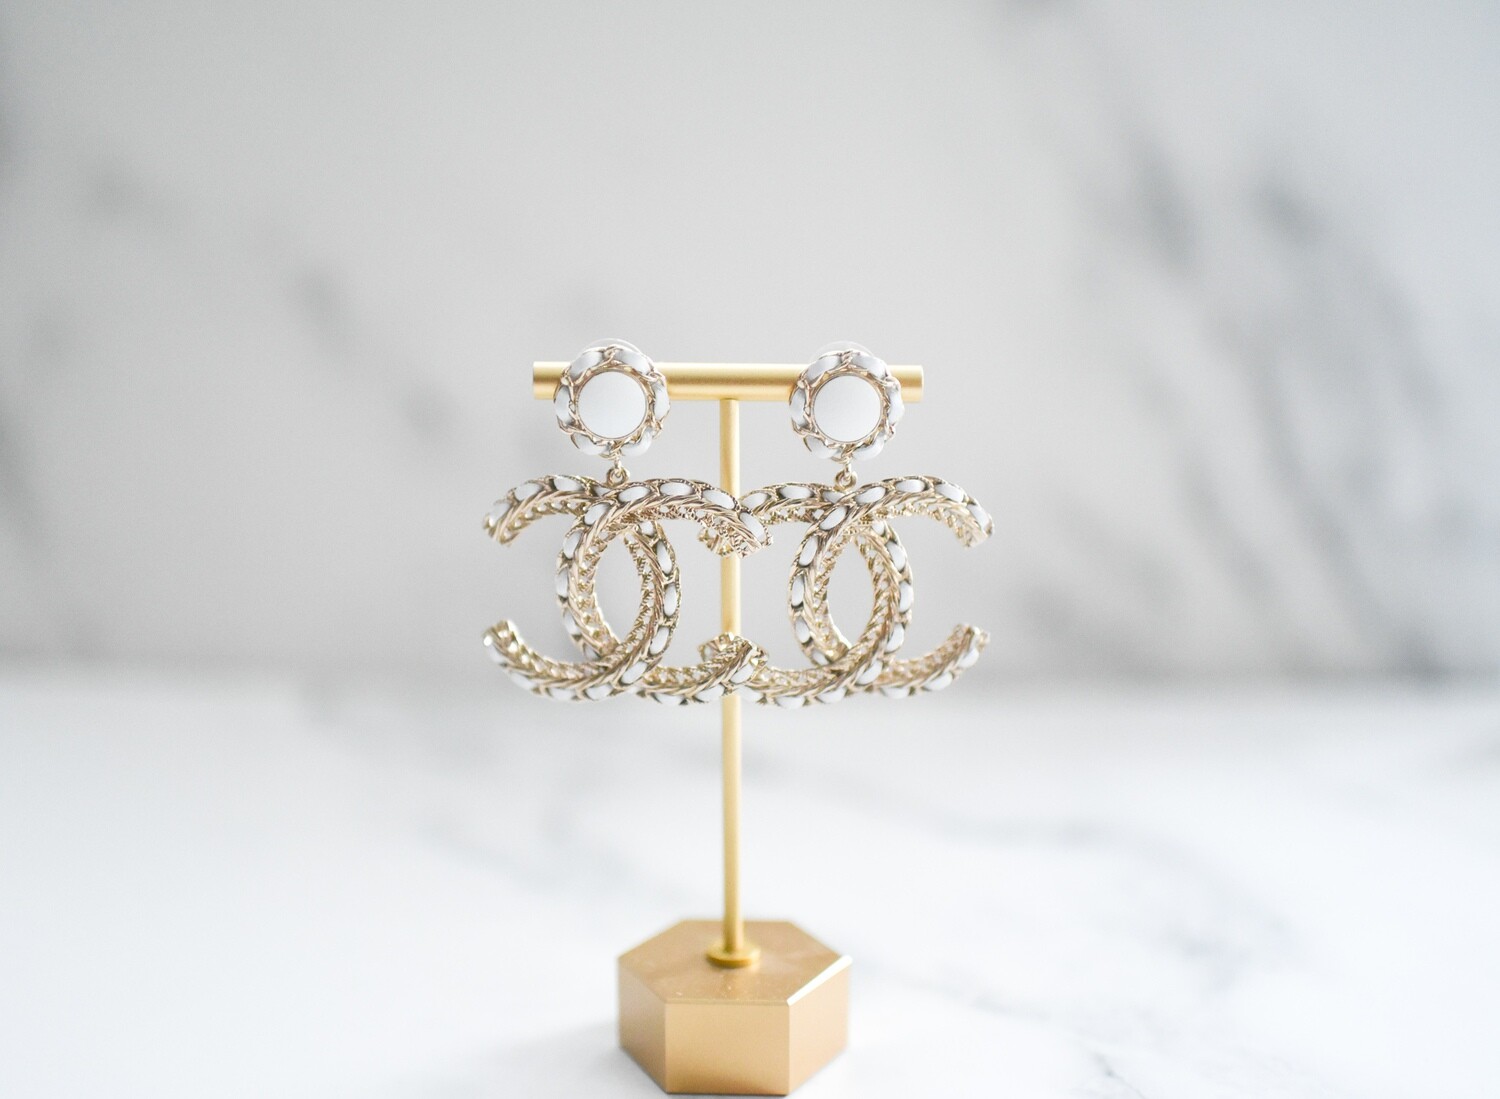 Chanel White And Gold Metal And Imitation Pearl CC Drop Earrings, 2020-2021  Available For Immediate Sale At Sotheby's